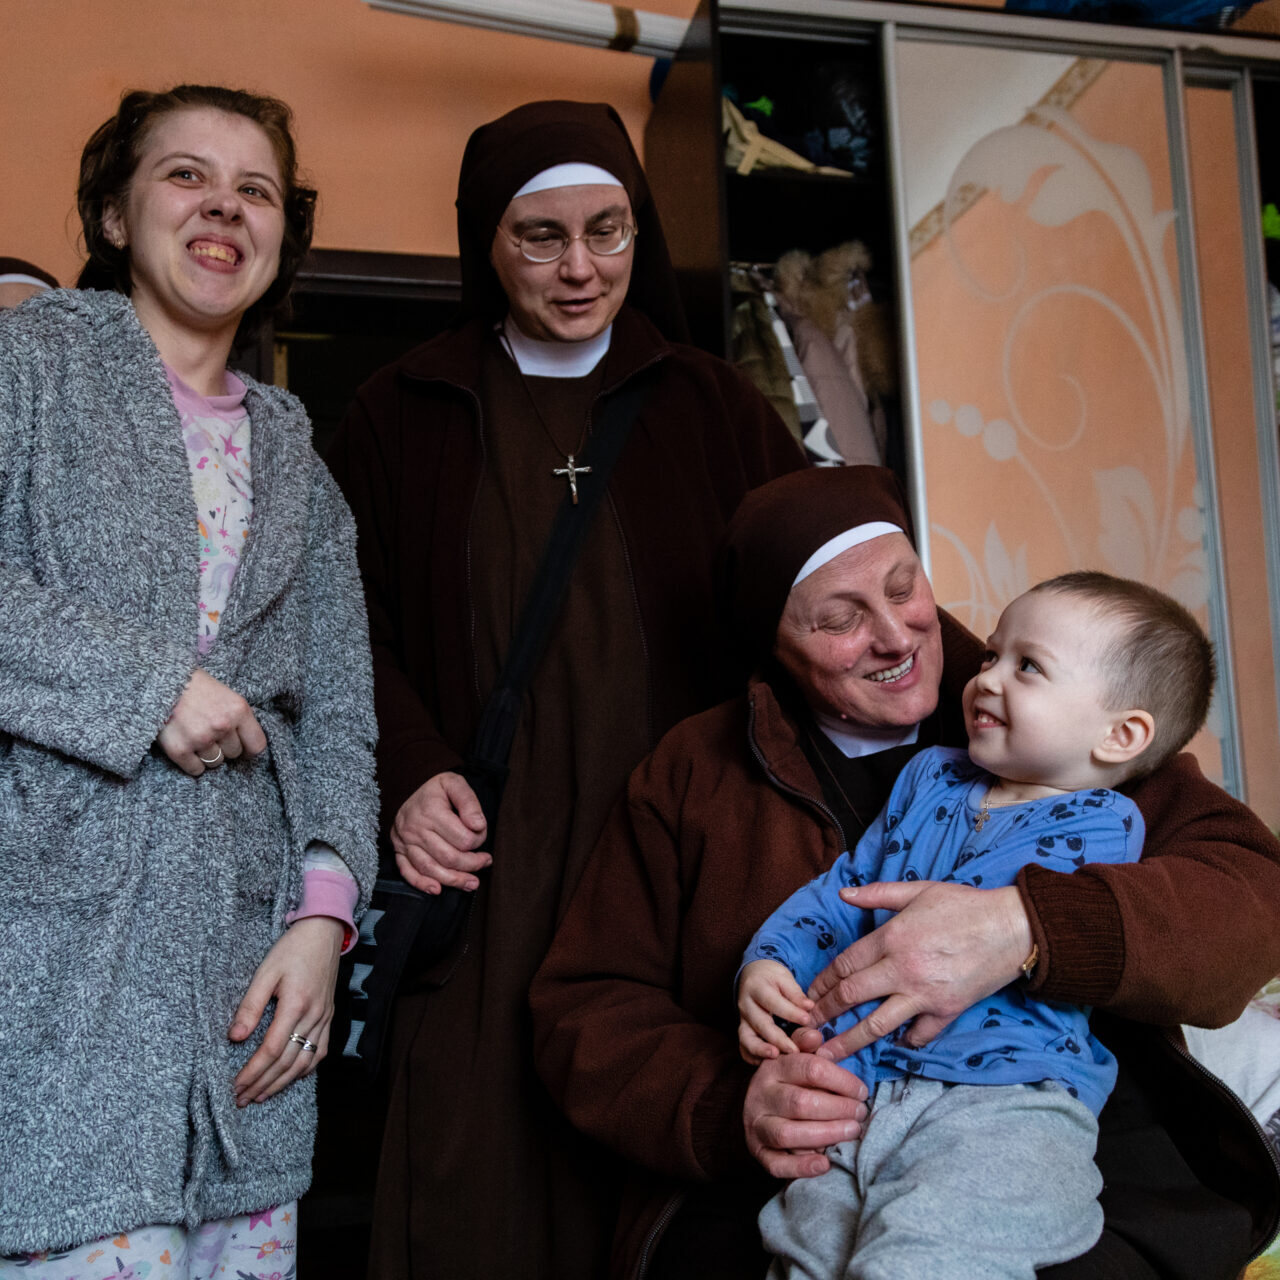 Natalya has minor mental disorders. Together with her blind husband and son Serhiy, she lives in a dormitory for partially sighted and blind people in Zhytomyr. The Franciscan nuns help the residents of the dormitory - they bring necessary things, and they also communicate with children and adults.